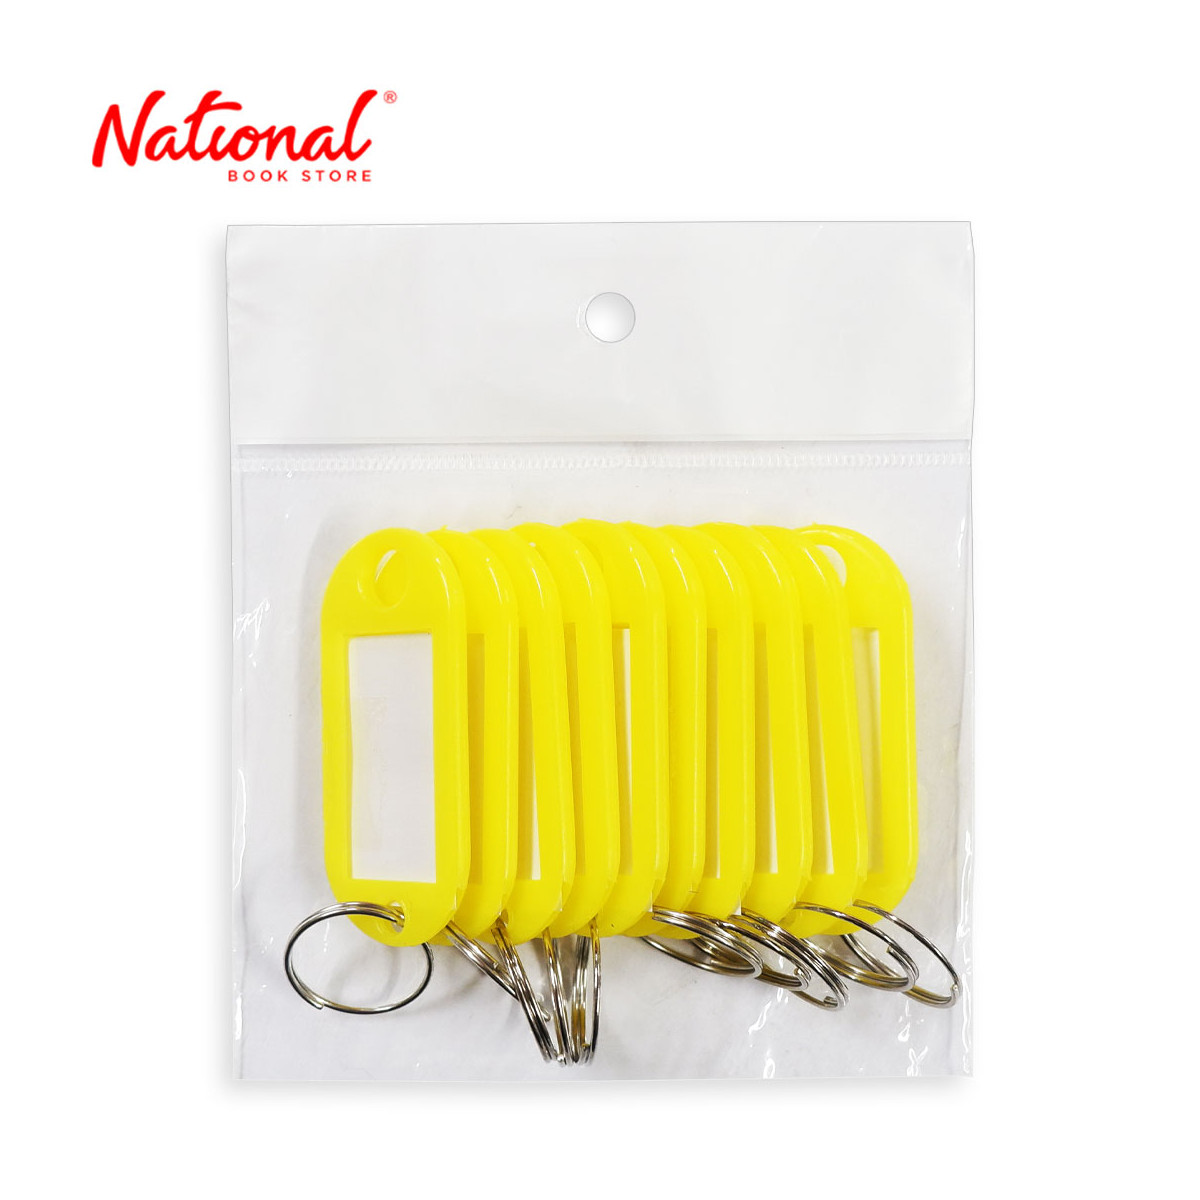 Tiger Key Tags 10 pieces Per Pack, Yellow - Stationery - Filing Accessories